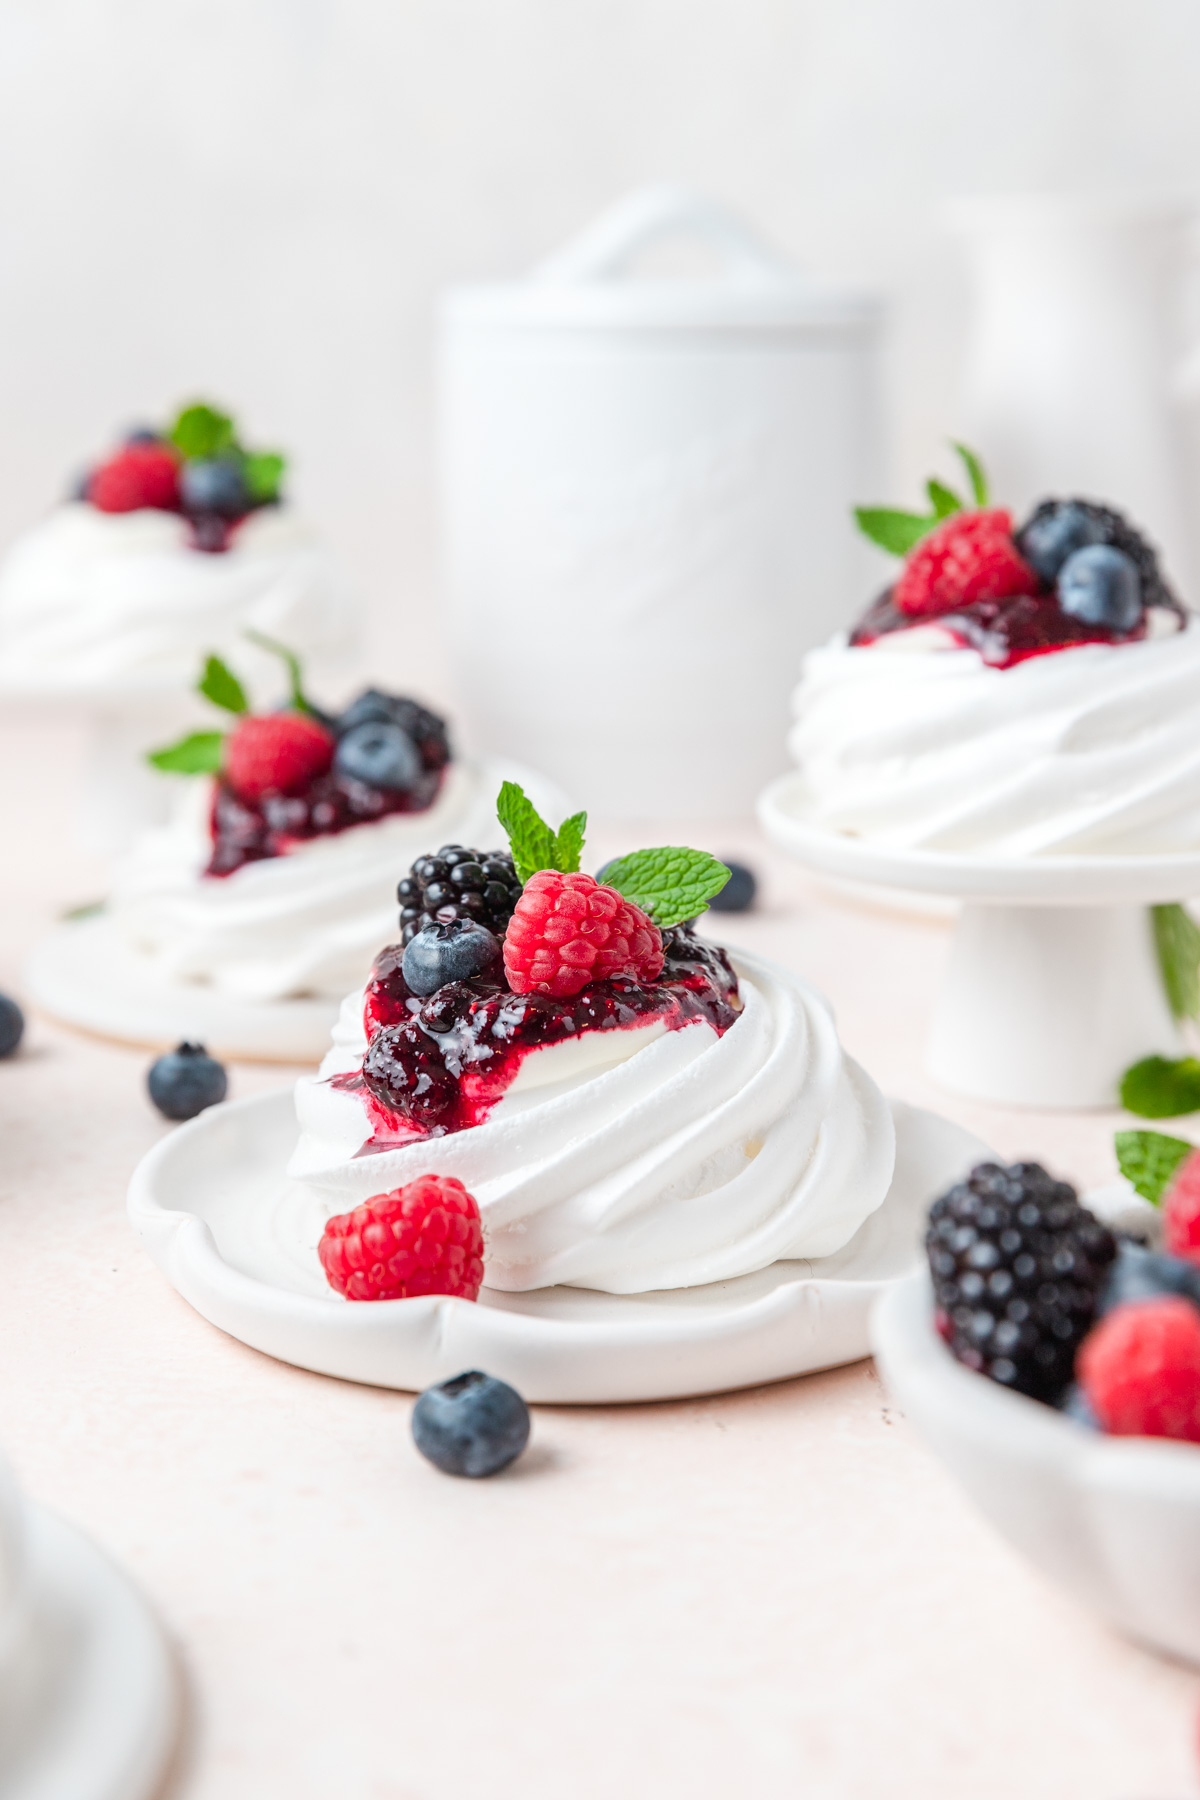 mini pavlovas topped with whipped cream and berries.